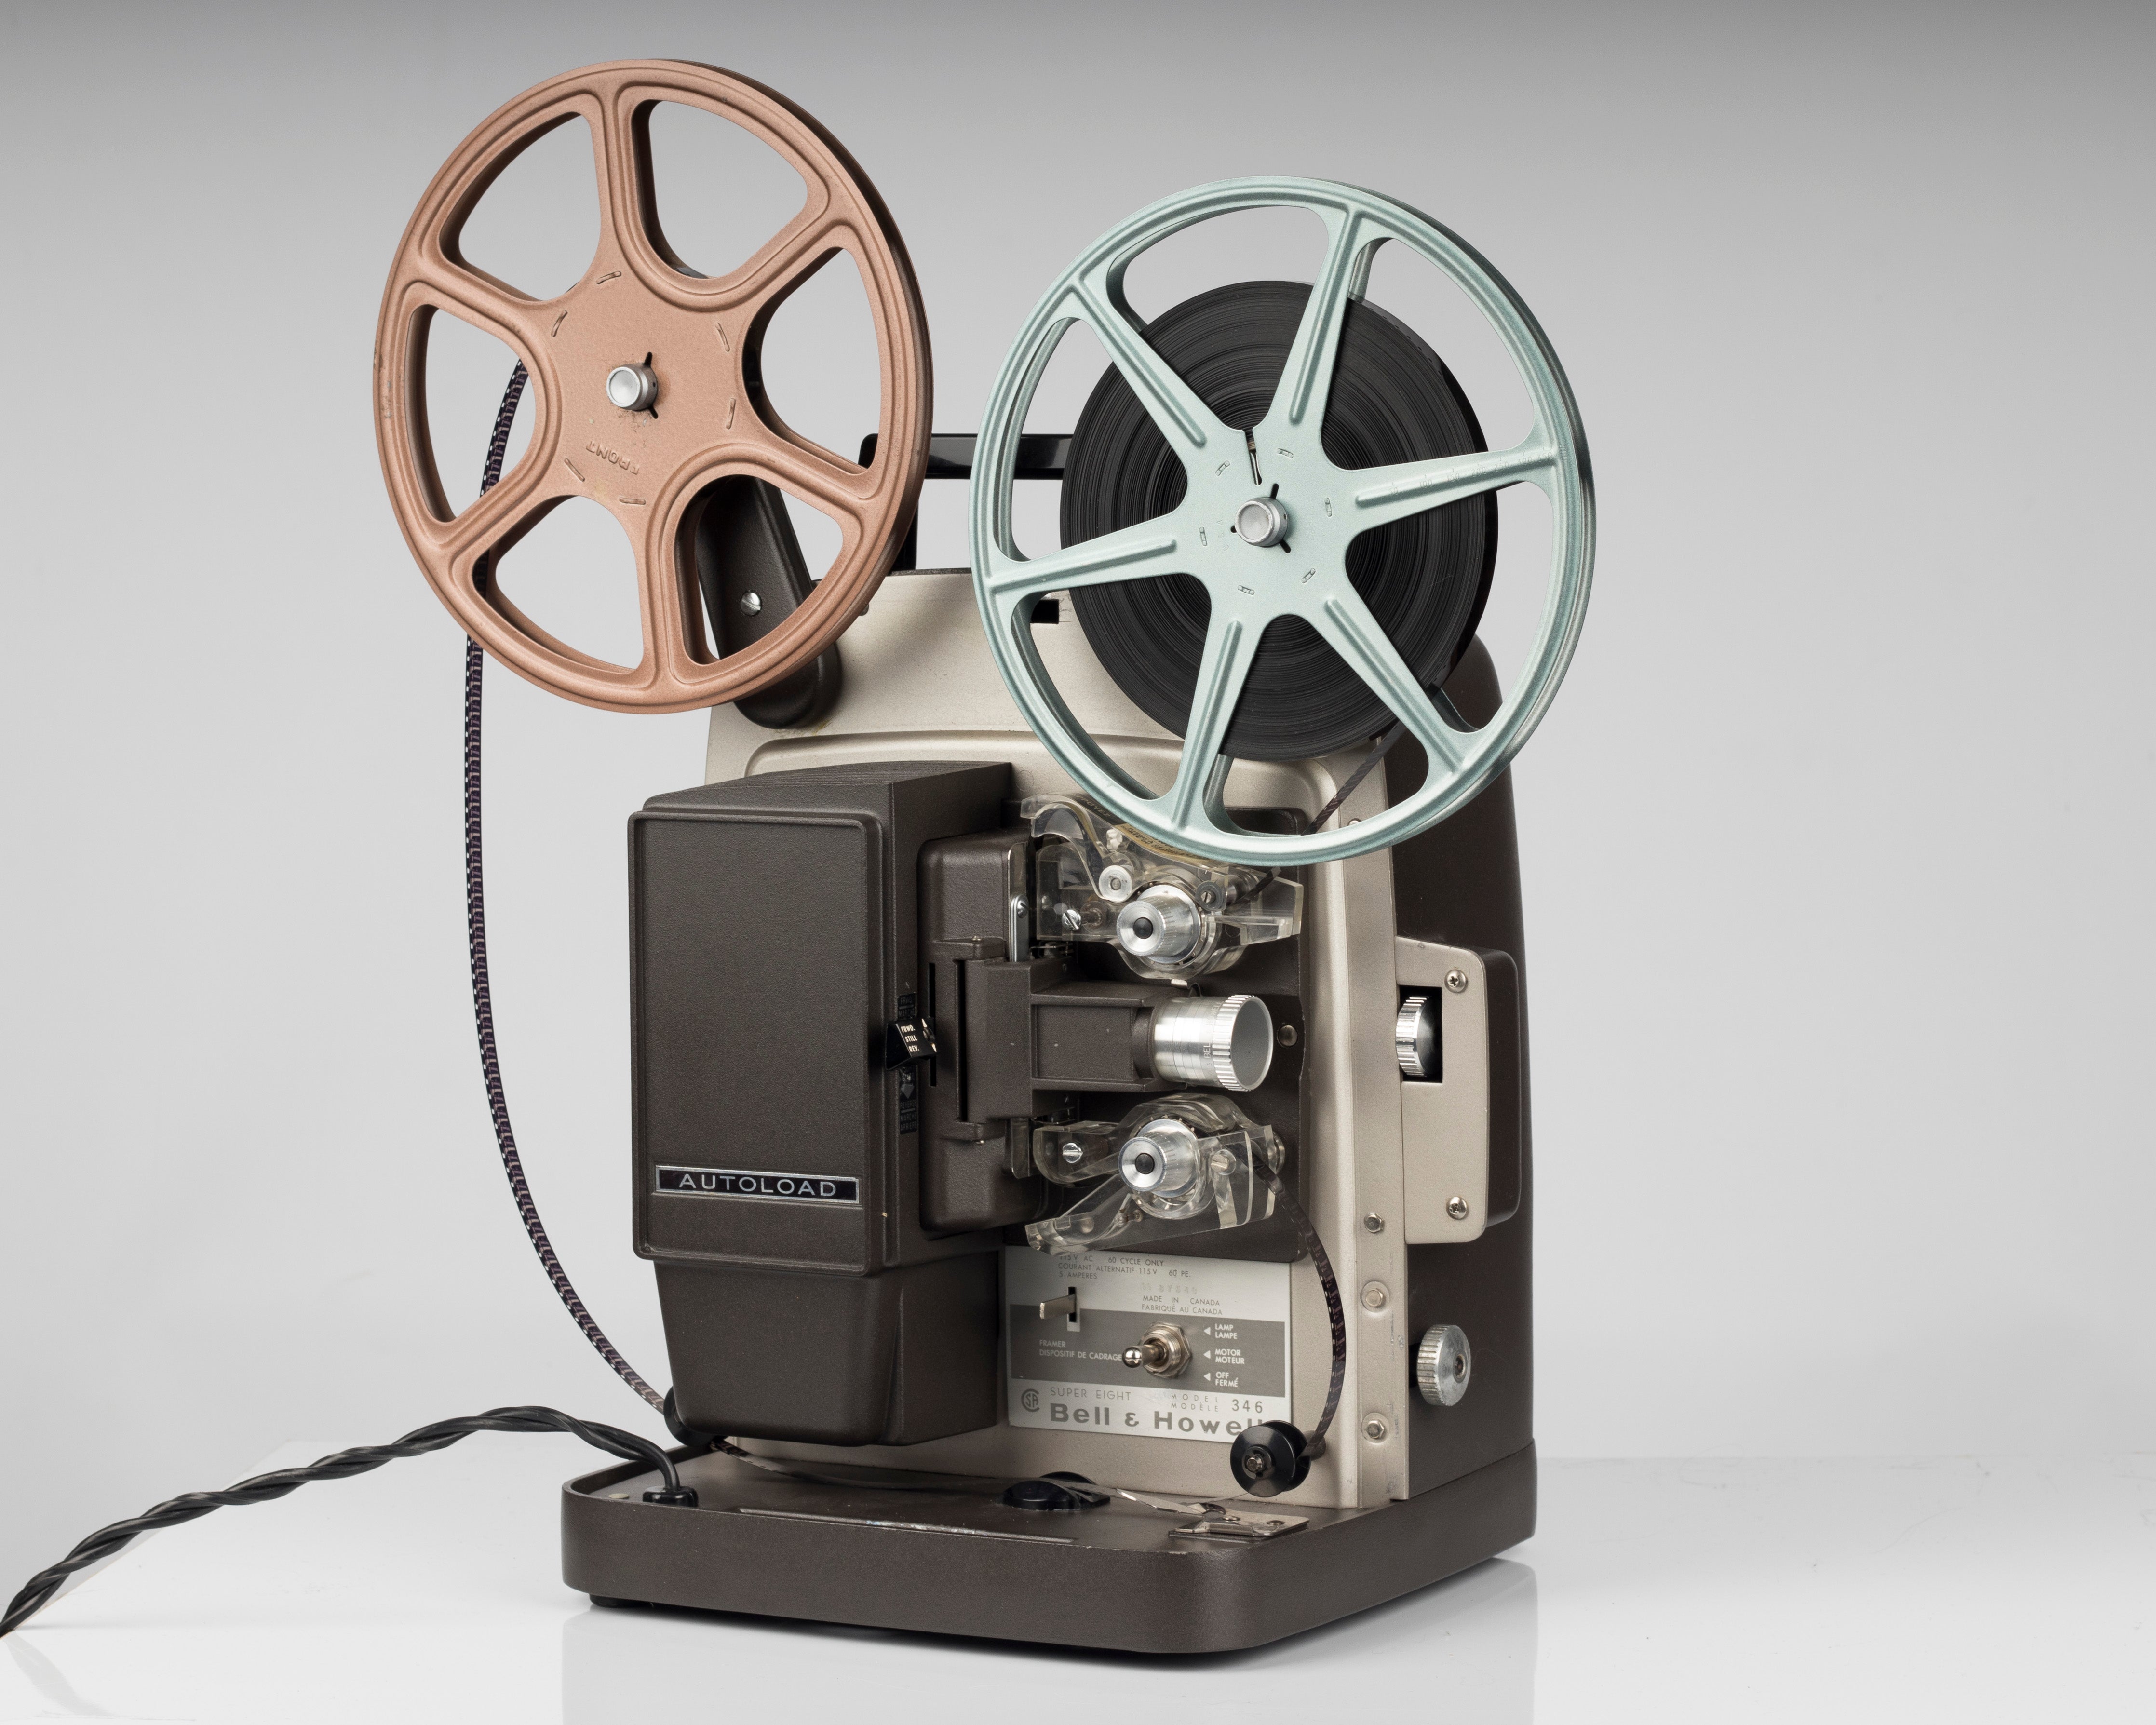 Bell and Howell 346 Super 8 movie projector – New Wave Pool